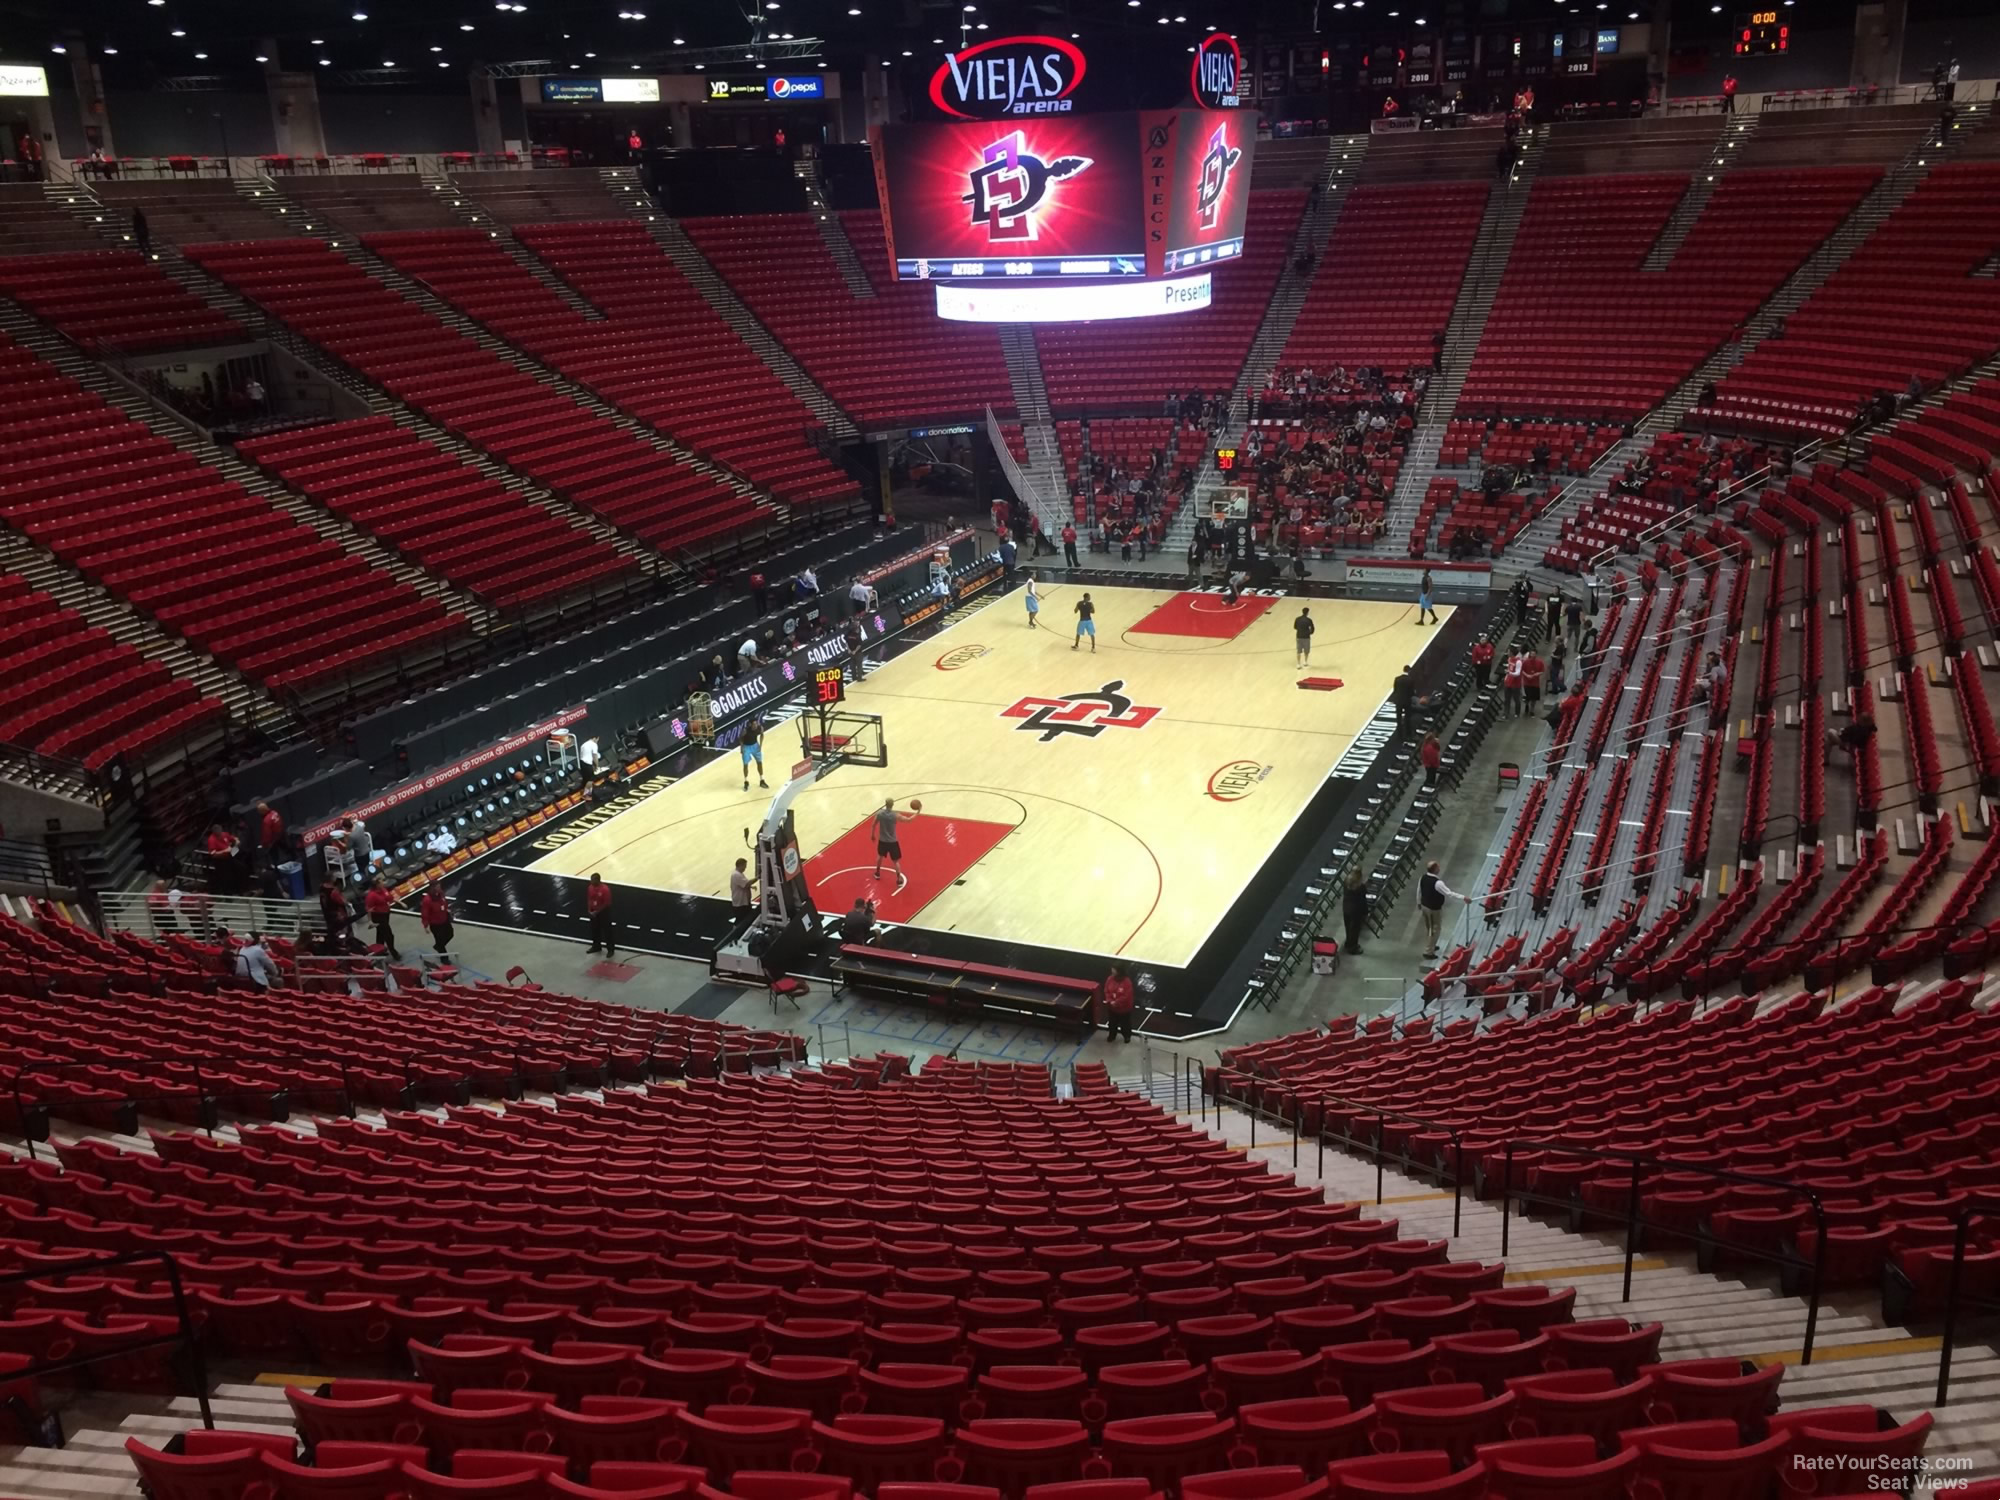 section b, row 30 seat view  - viejas arena